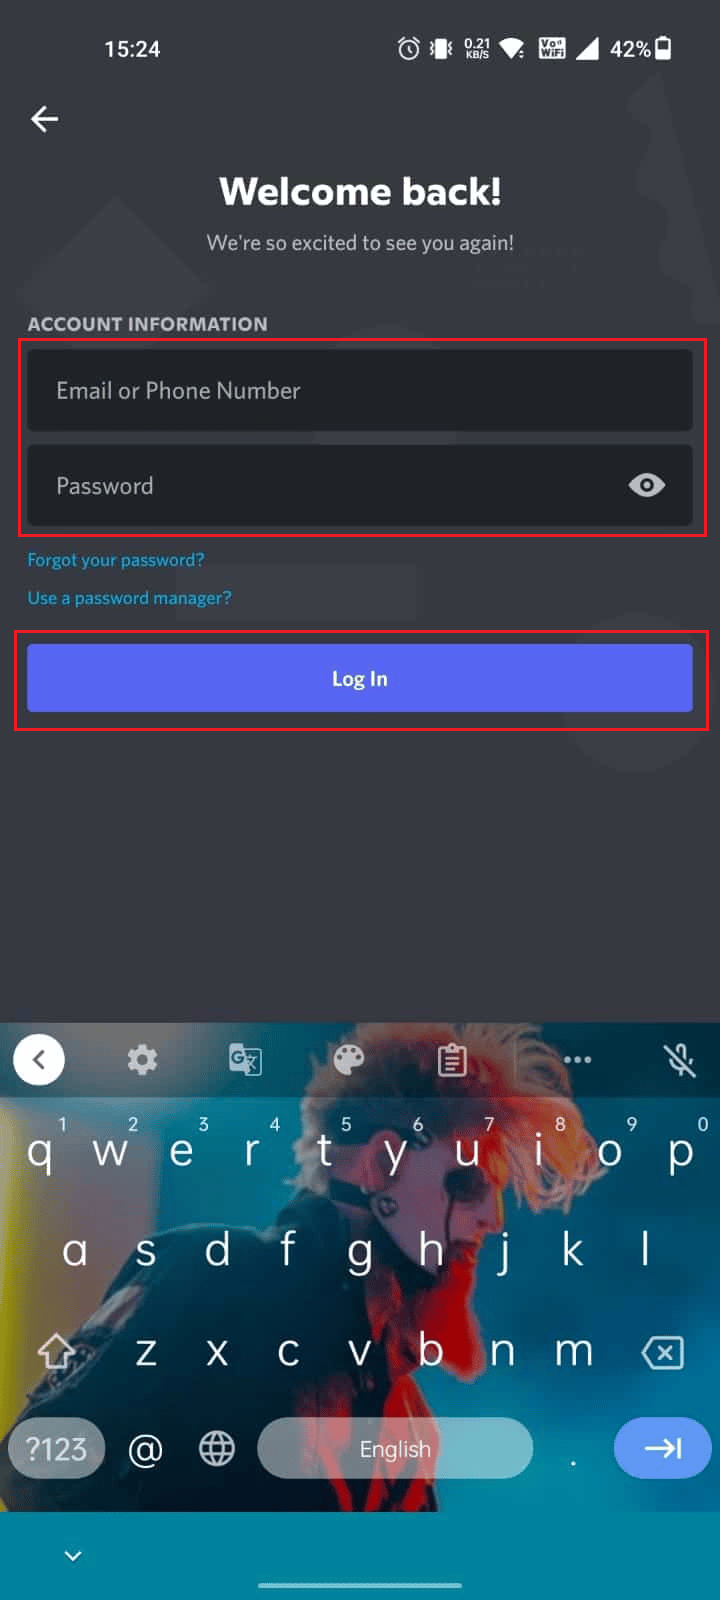 Open the Discord app and Log In to your account